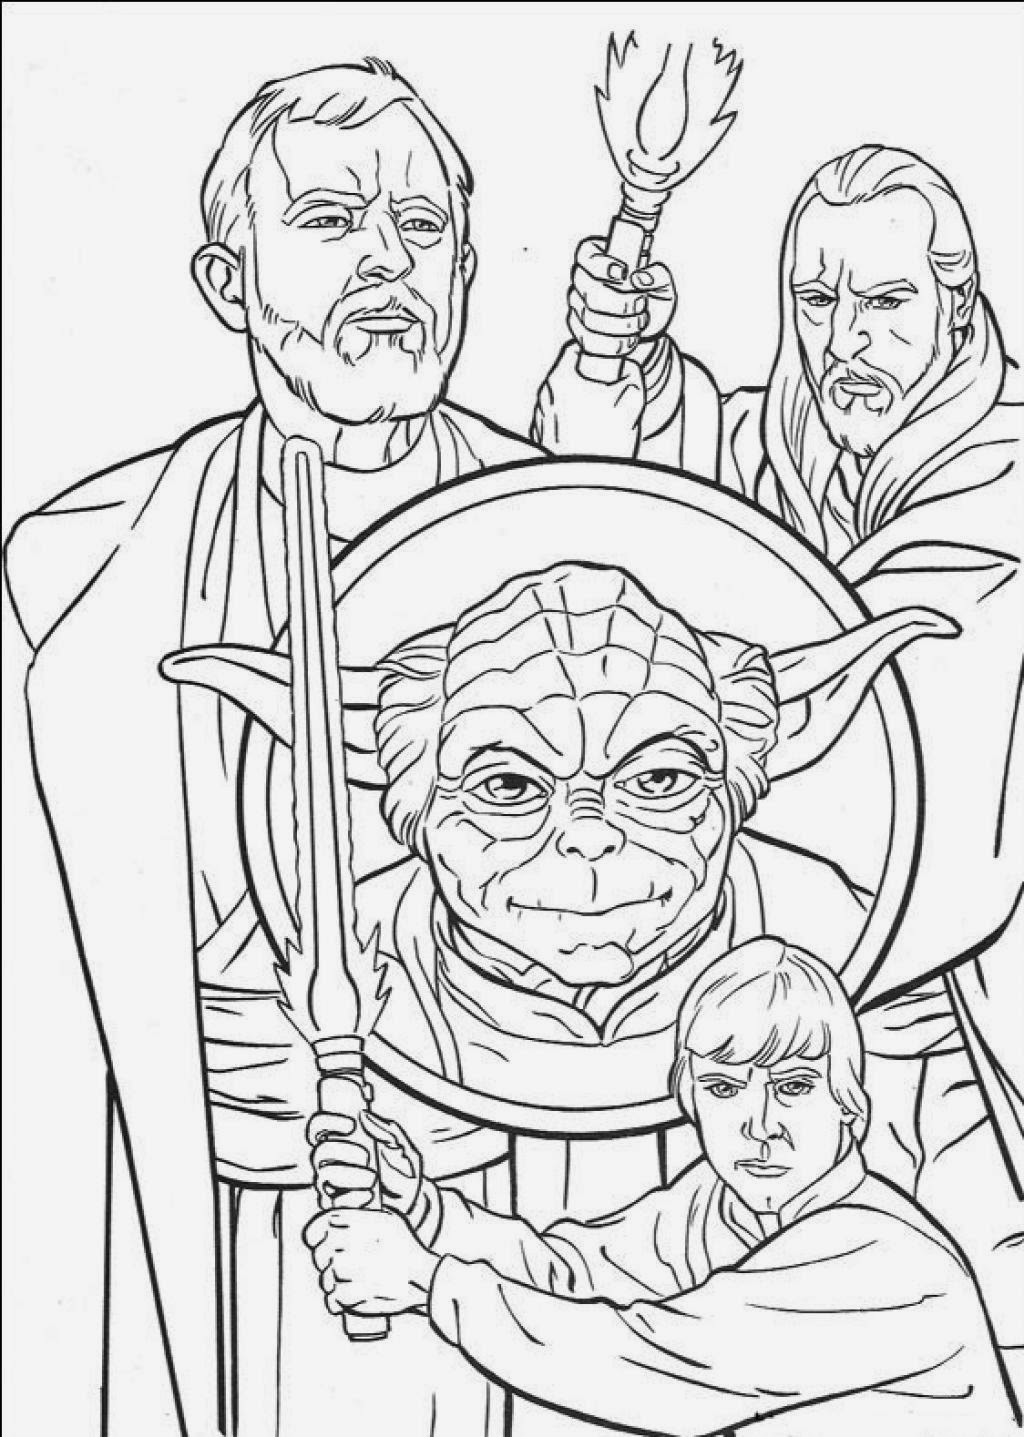 Star Wars Coloring Pages Printable
 Printable coloring pages